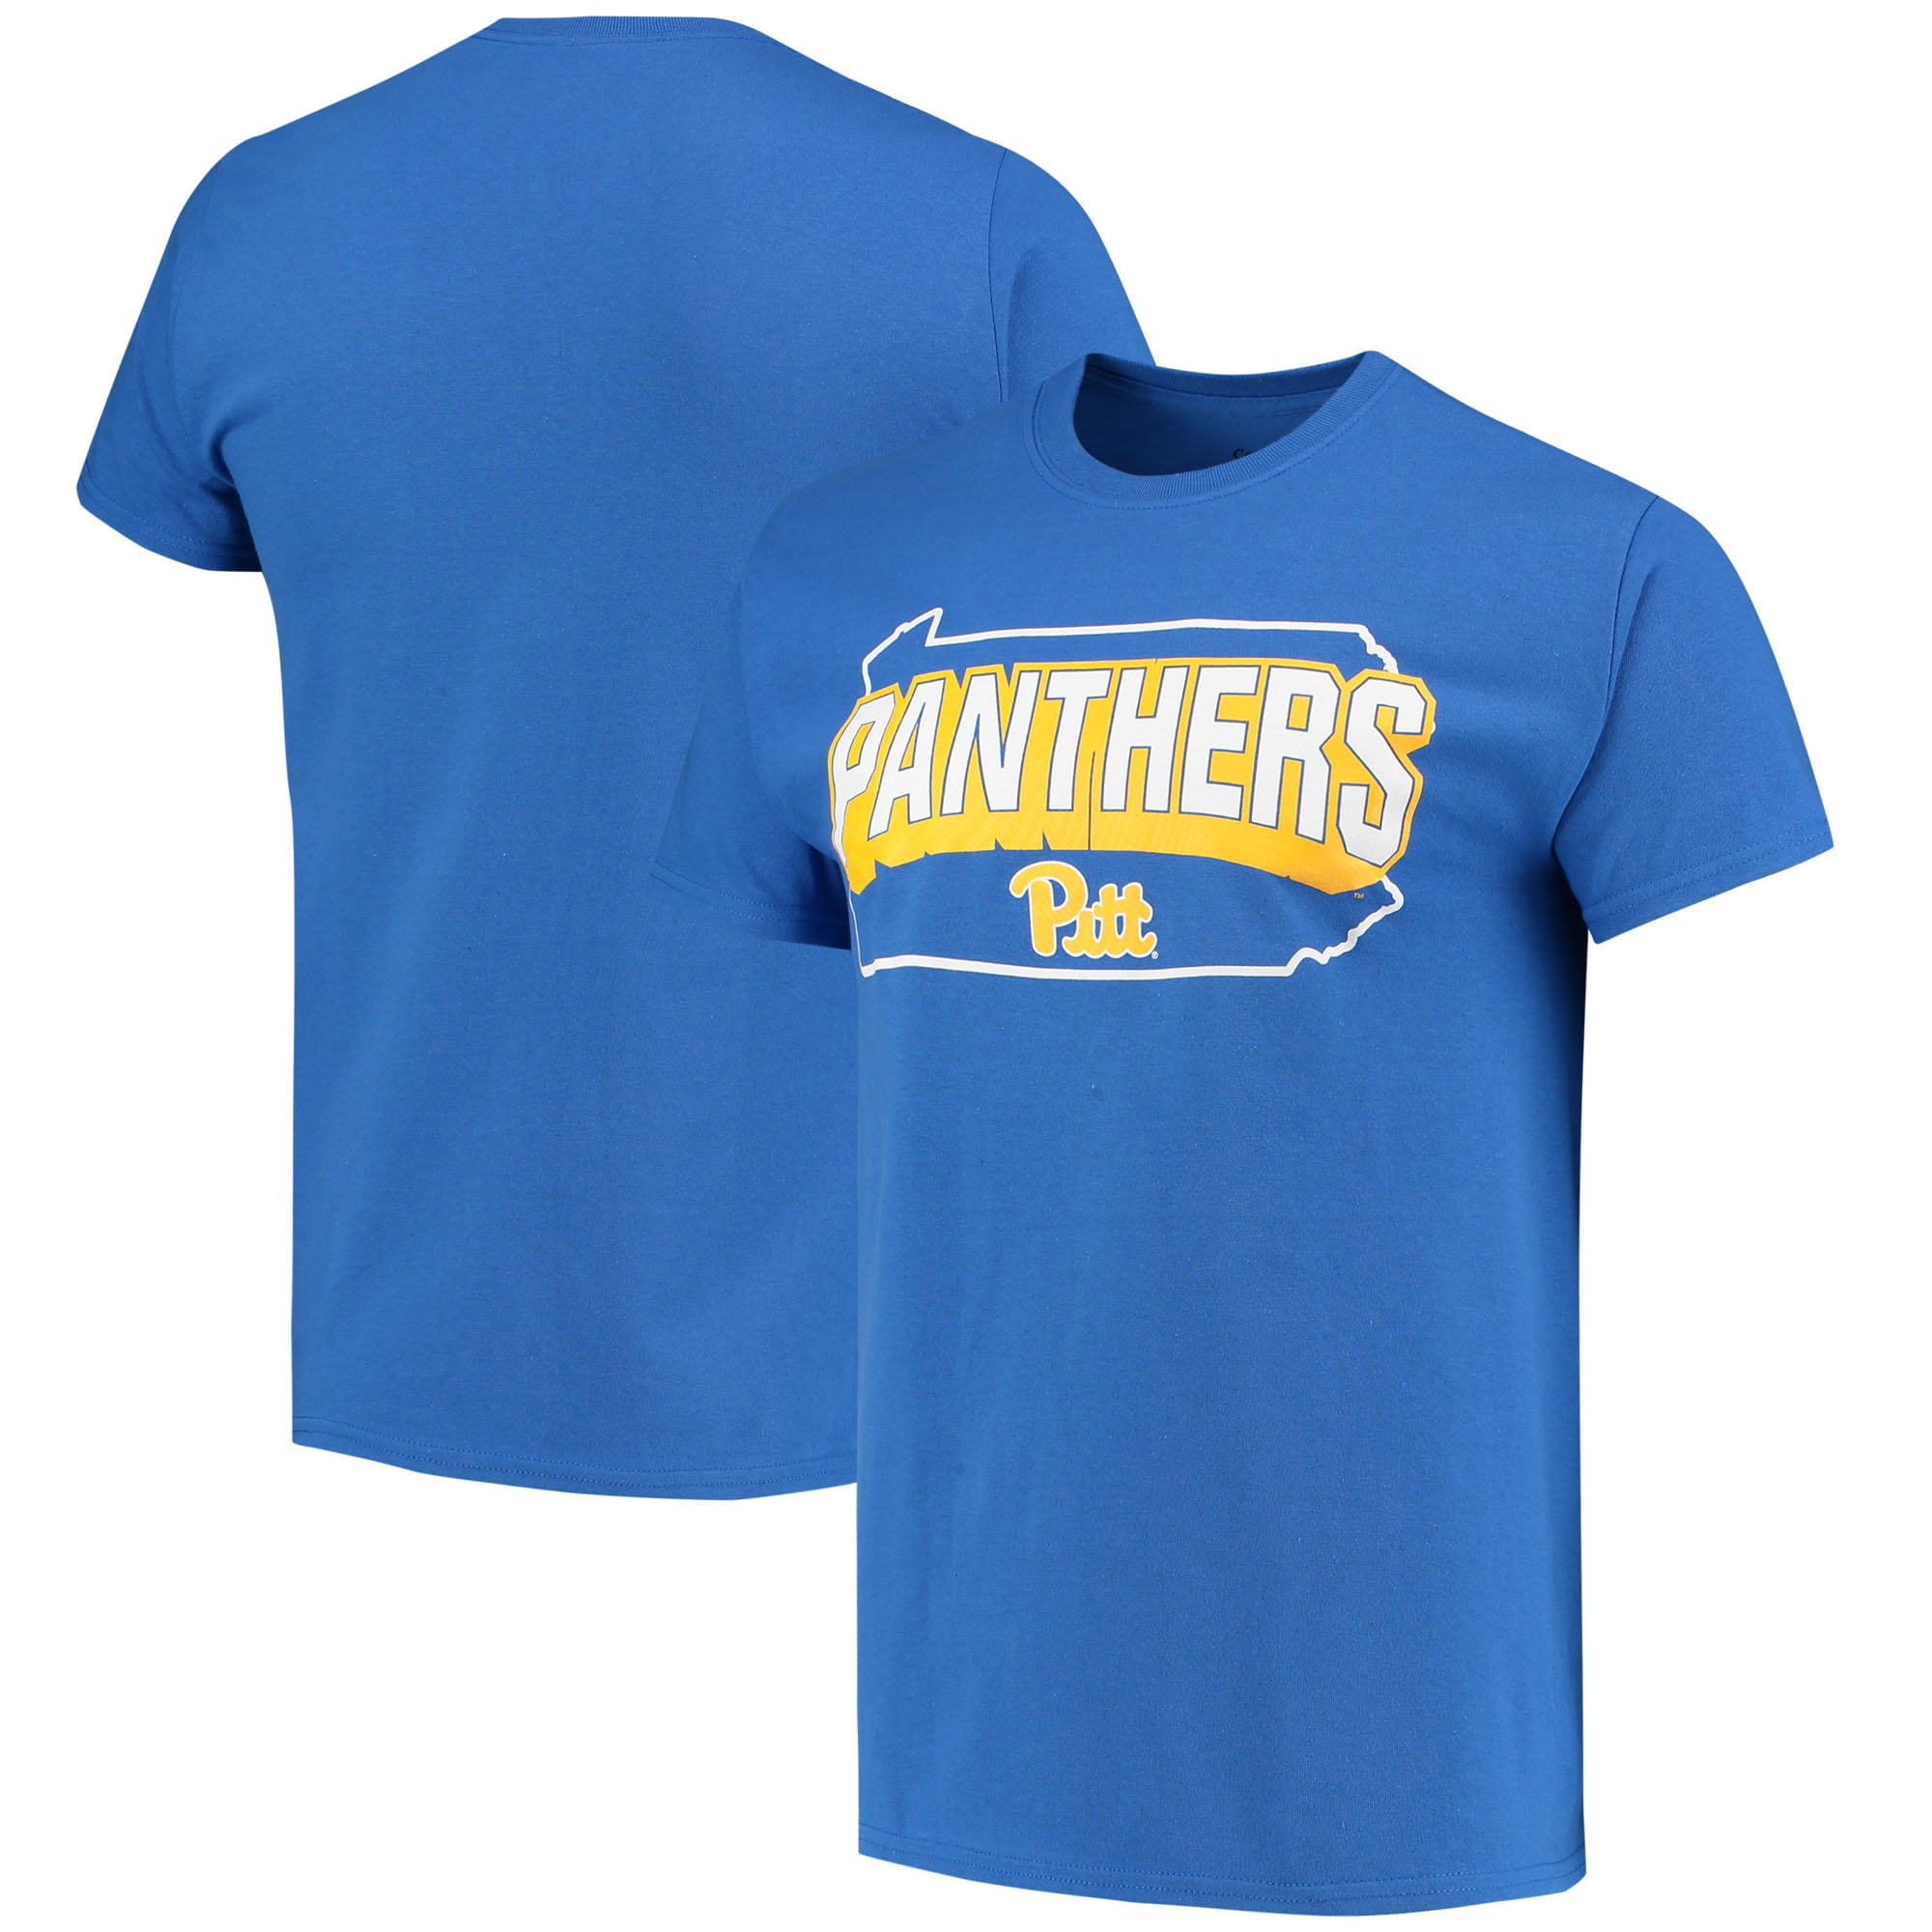 Captivating Apparel - Men's Royal Pitt Panthers Foundation State T ...